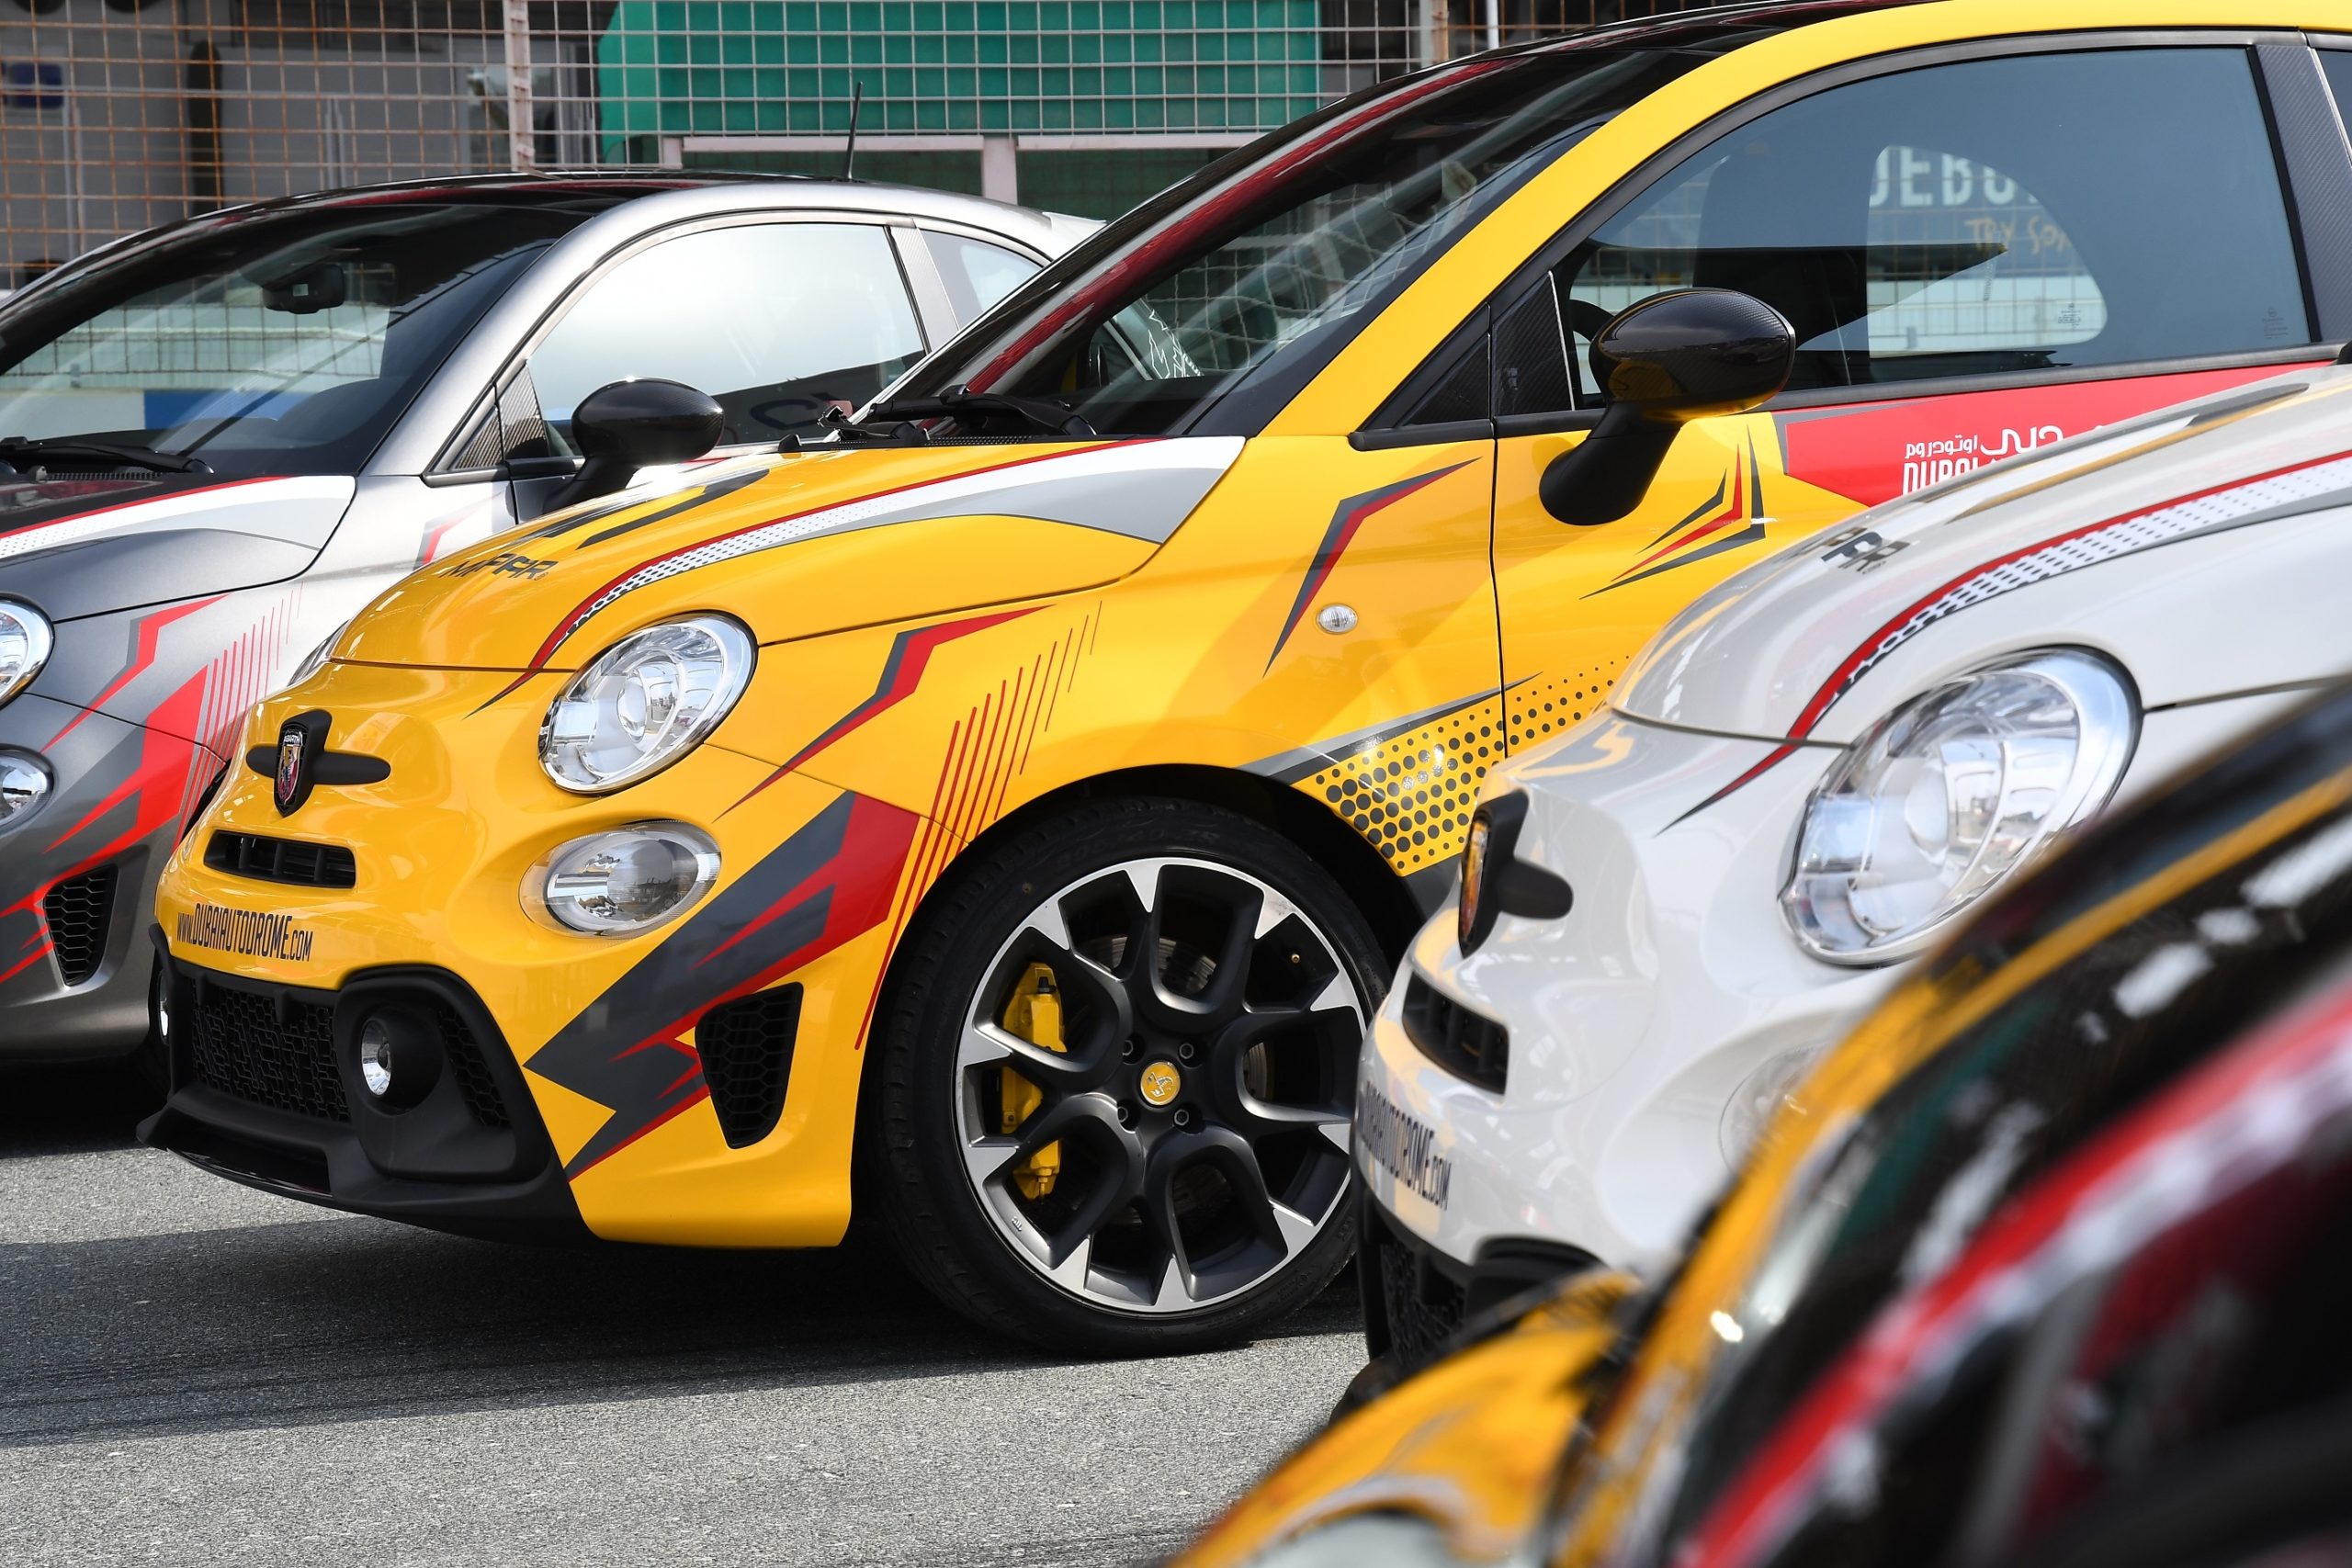 Abarth to officially announce their first club in Dubai to gather all their loyal fan to conduct events and have a great experience.